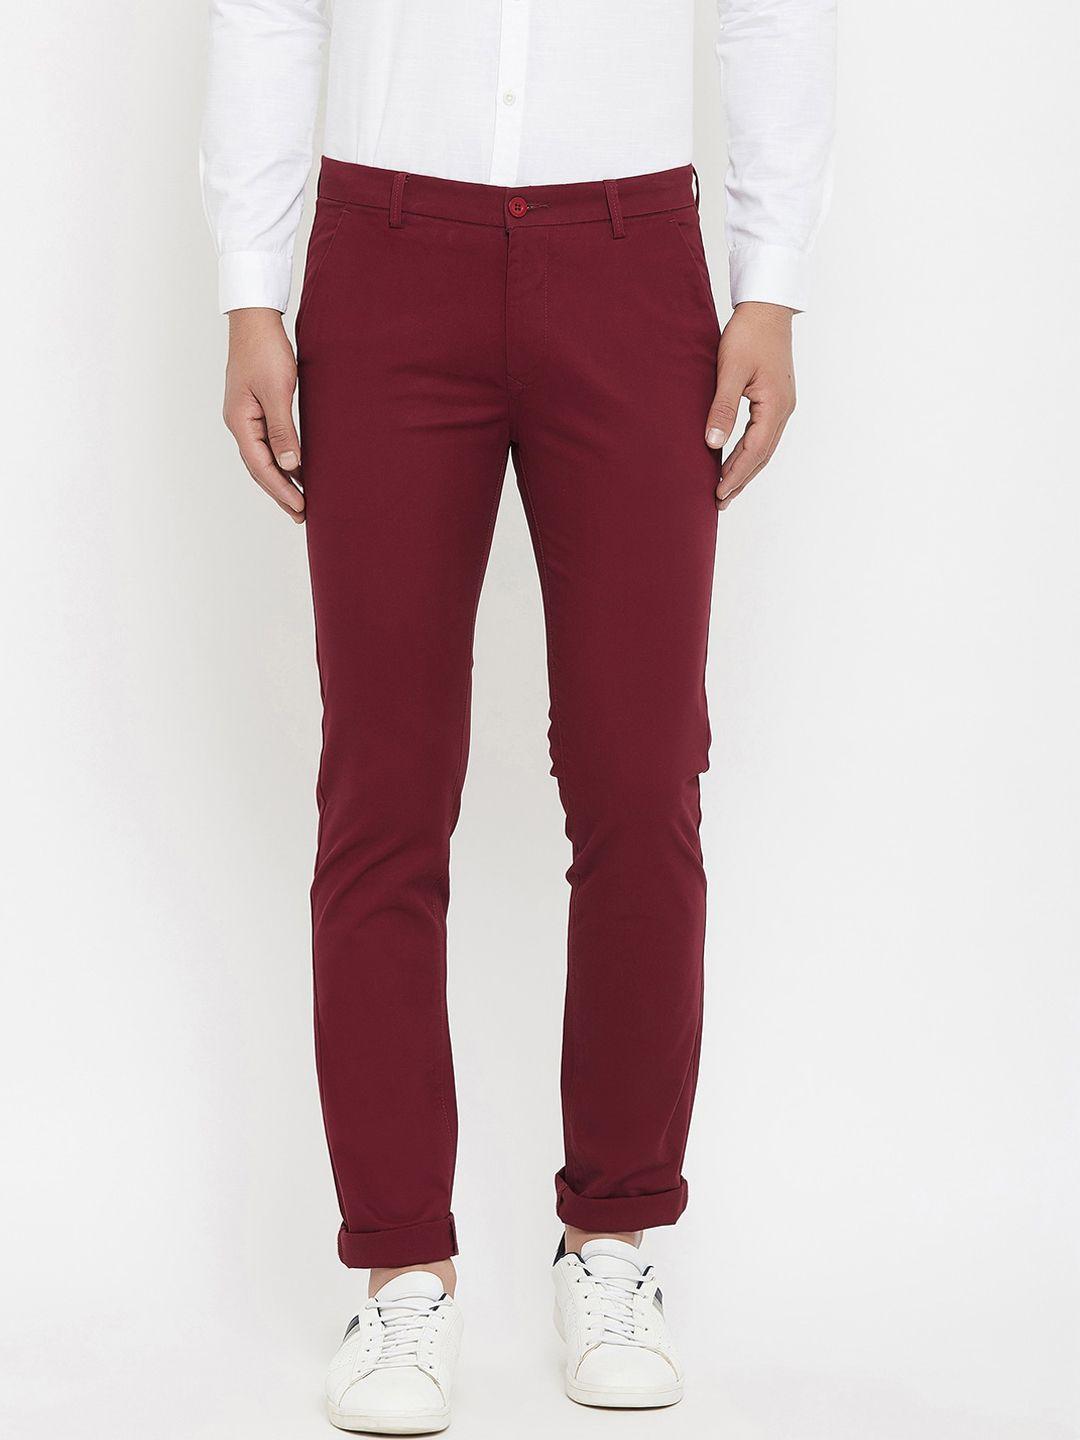 canary london men maroon slim fit chinos trousers